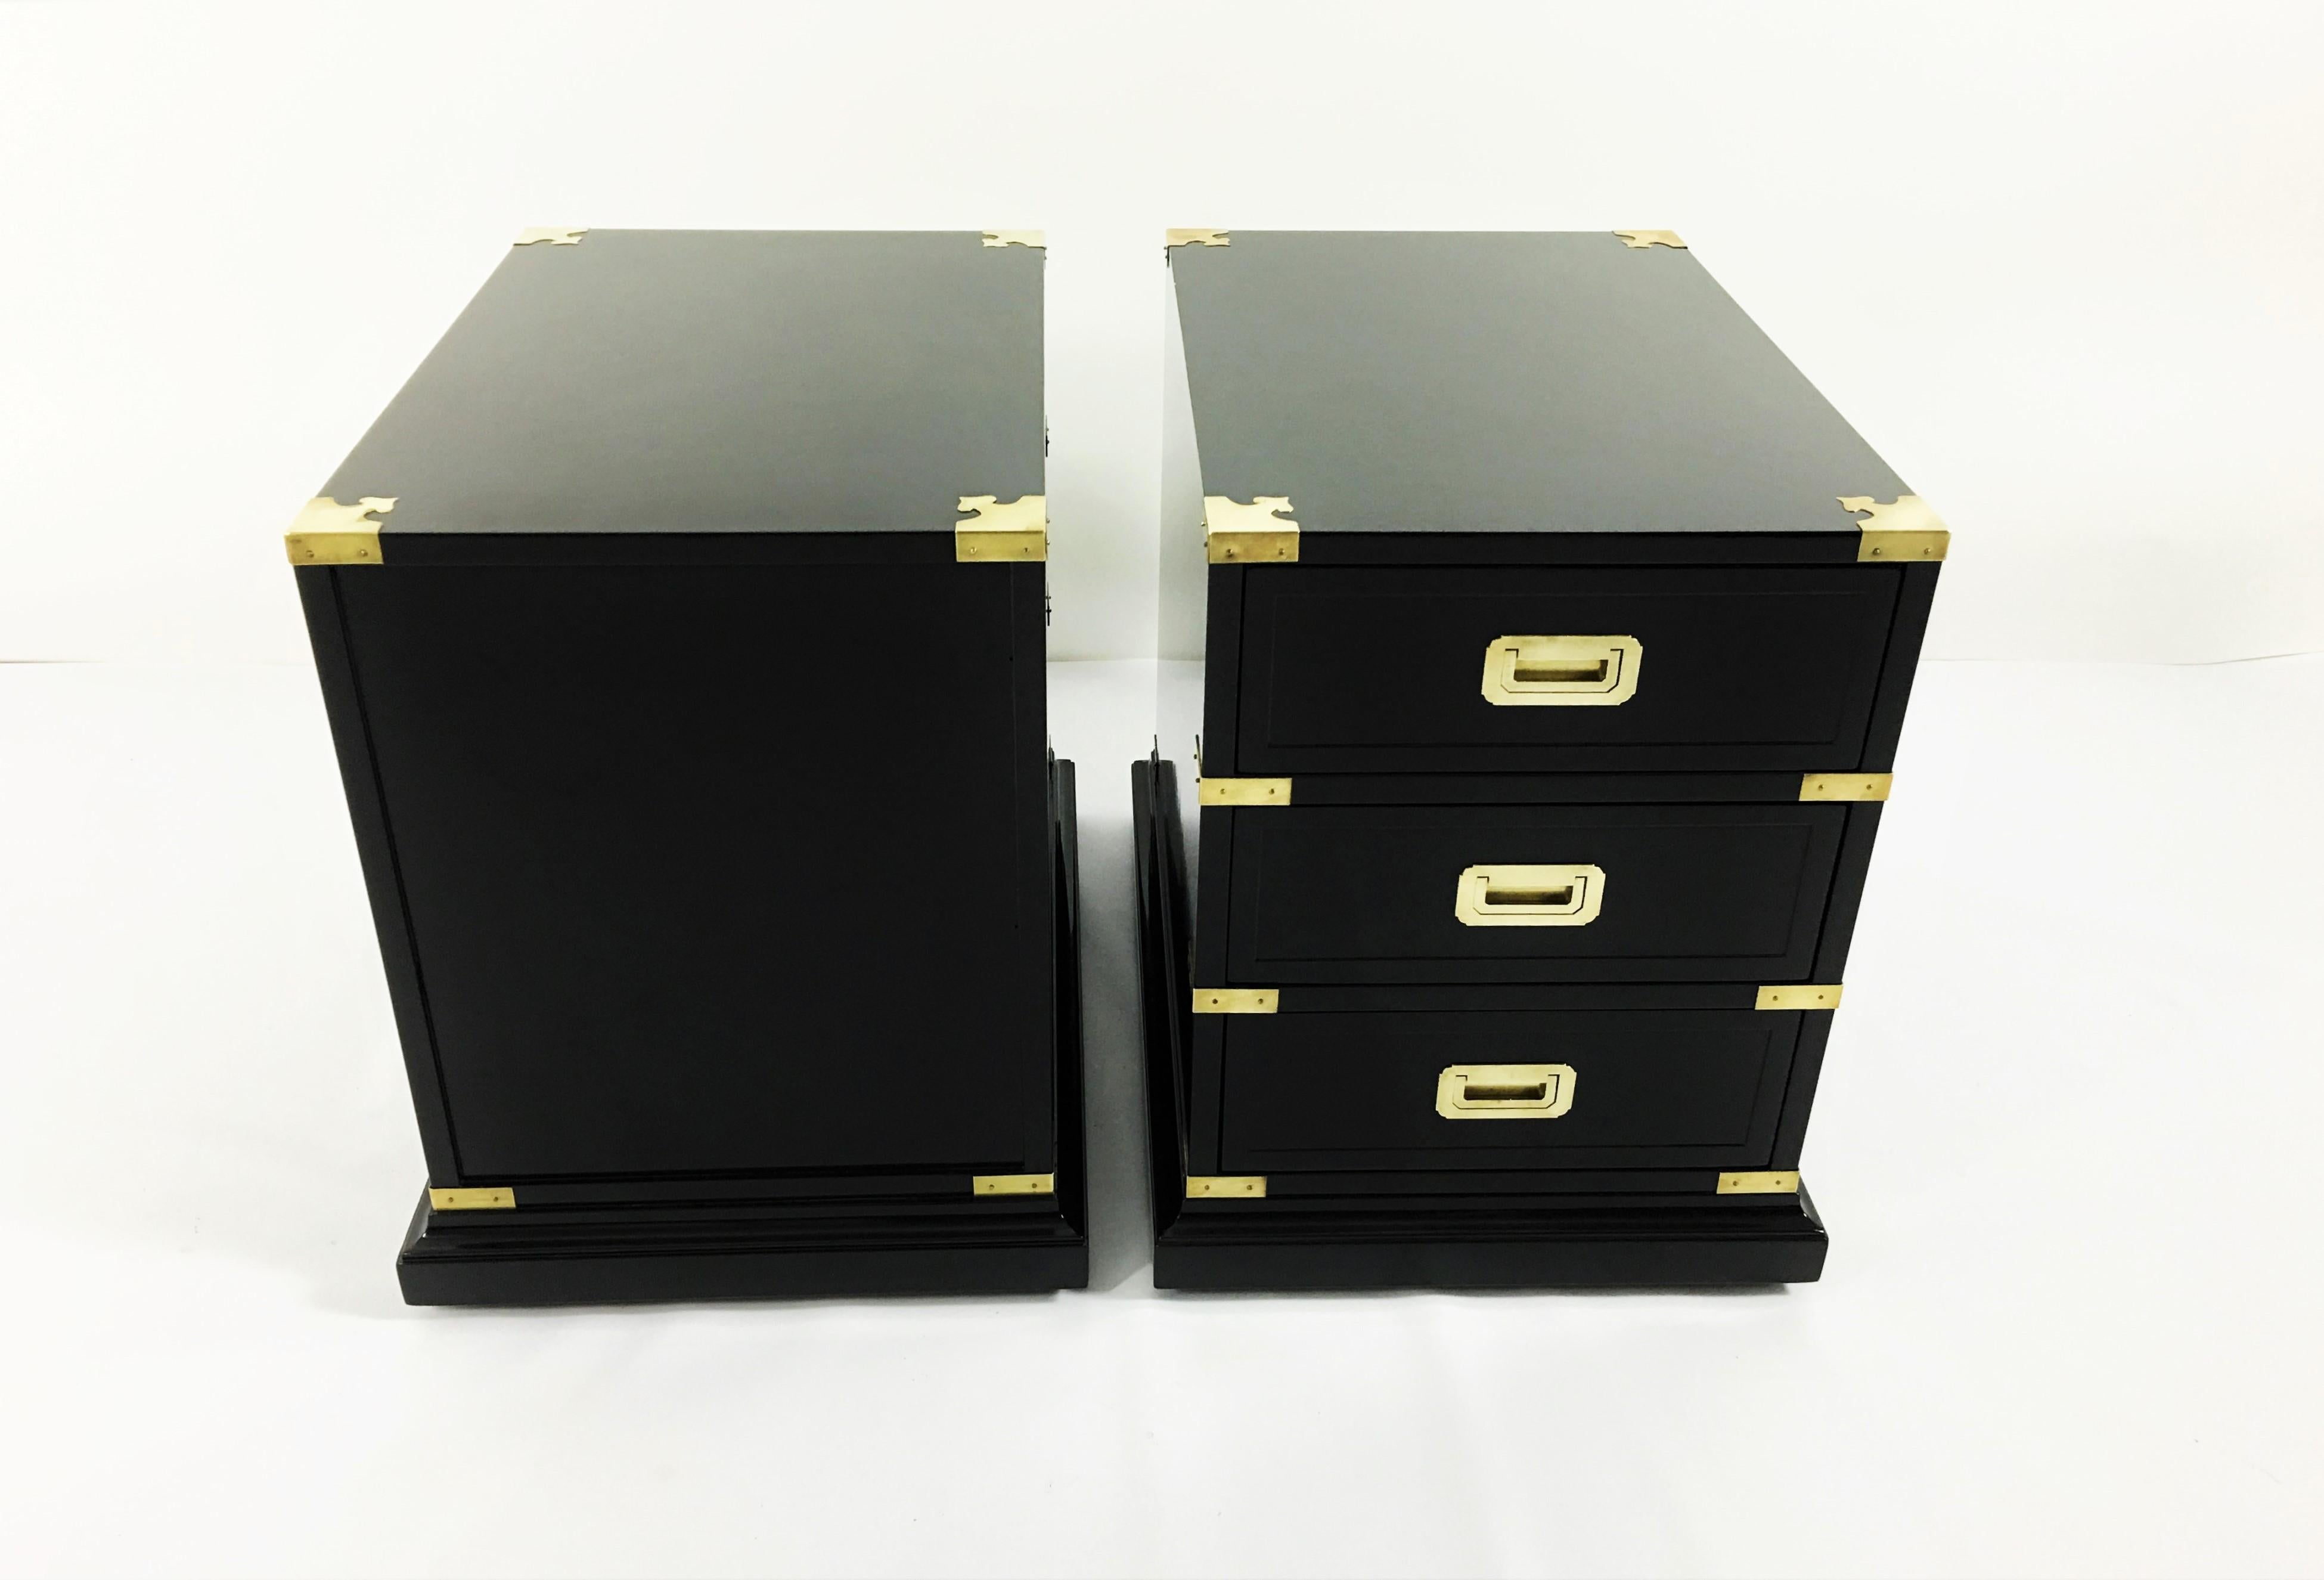 Elegant pair of black lacquered Campaign style side tables manufactured by Hekman Furniture, circa 1930s. Richly adorned with gilt brass hardware and trim details, dovetailed drawers and on wheels. Finished on all sides.